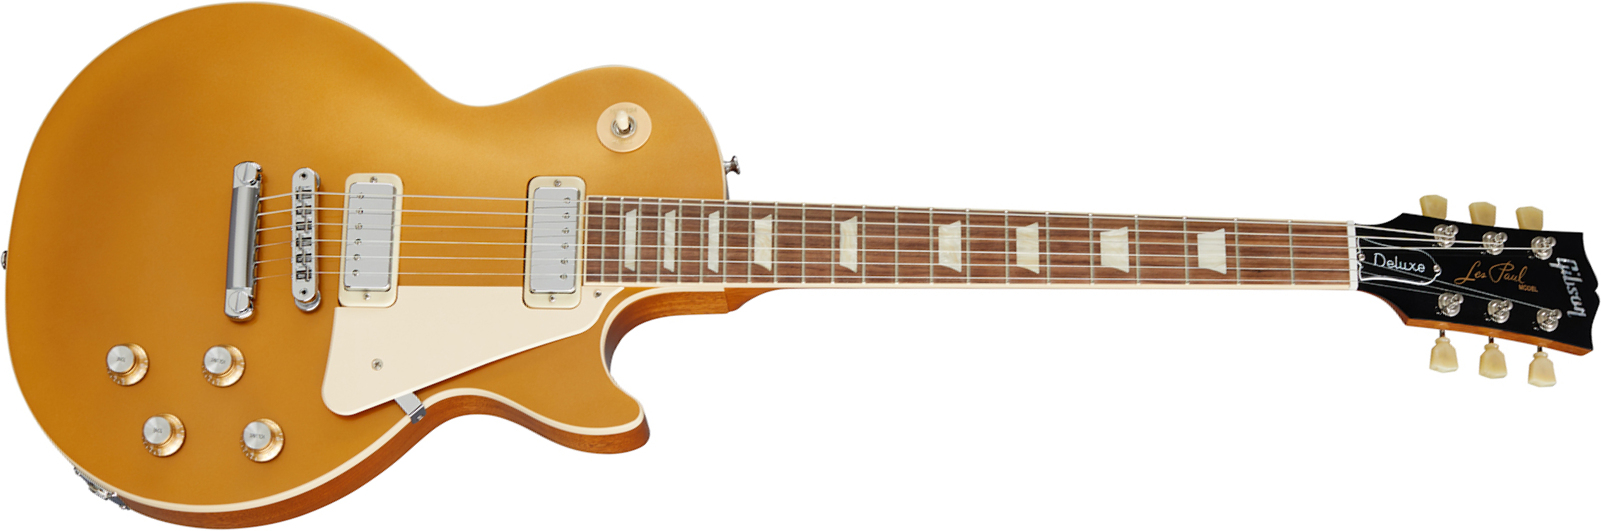 Gibson Les Paul Deluxe 70s Original 2mh Ht Rw - Gold Top - Single cut electric guitar - Main picture